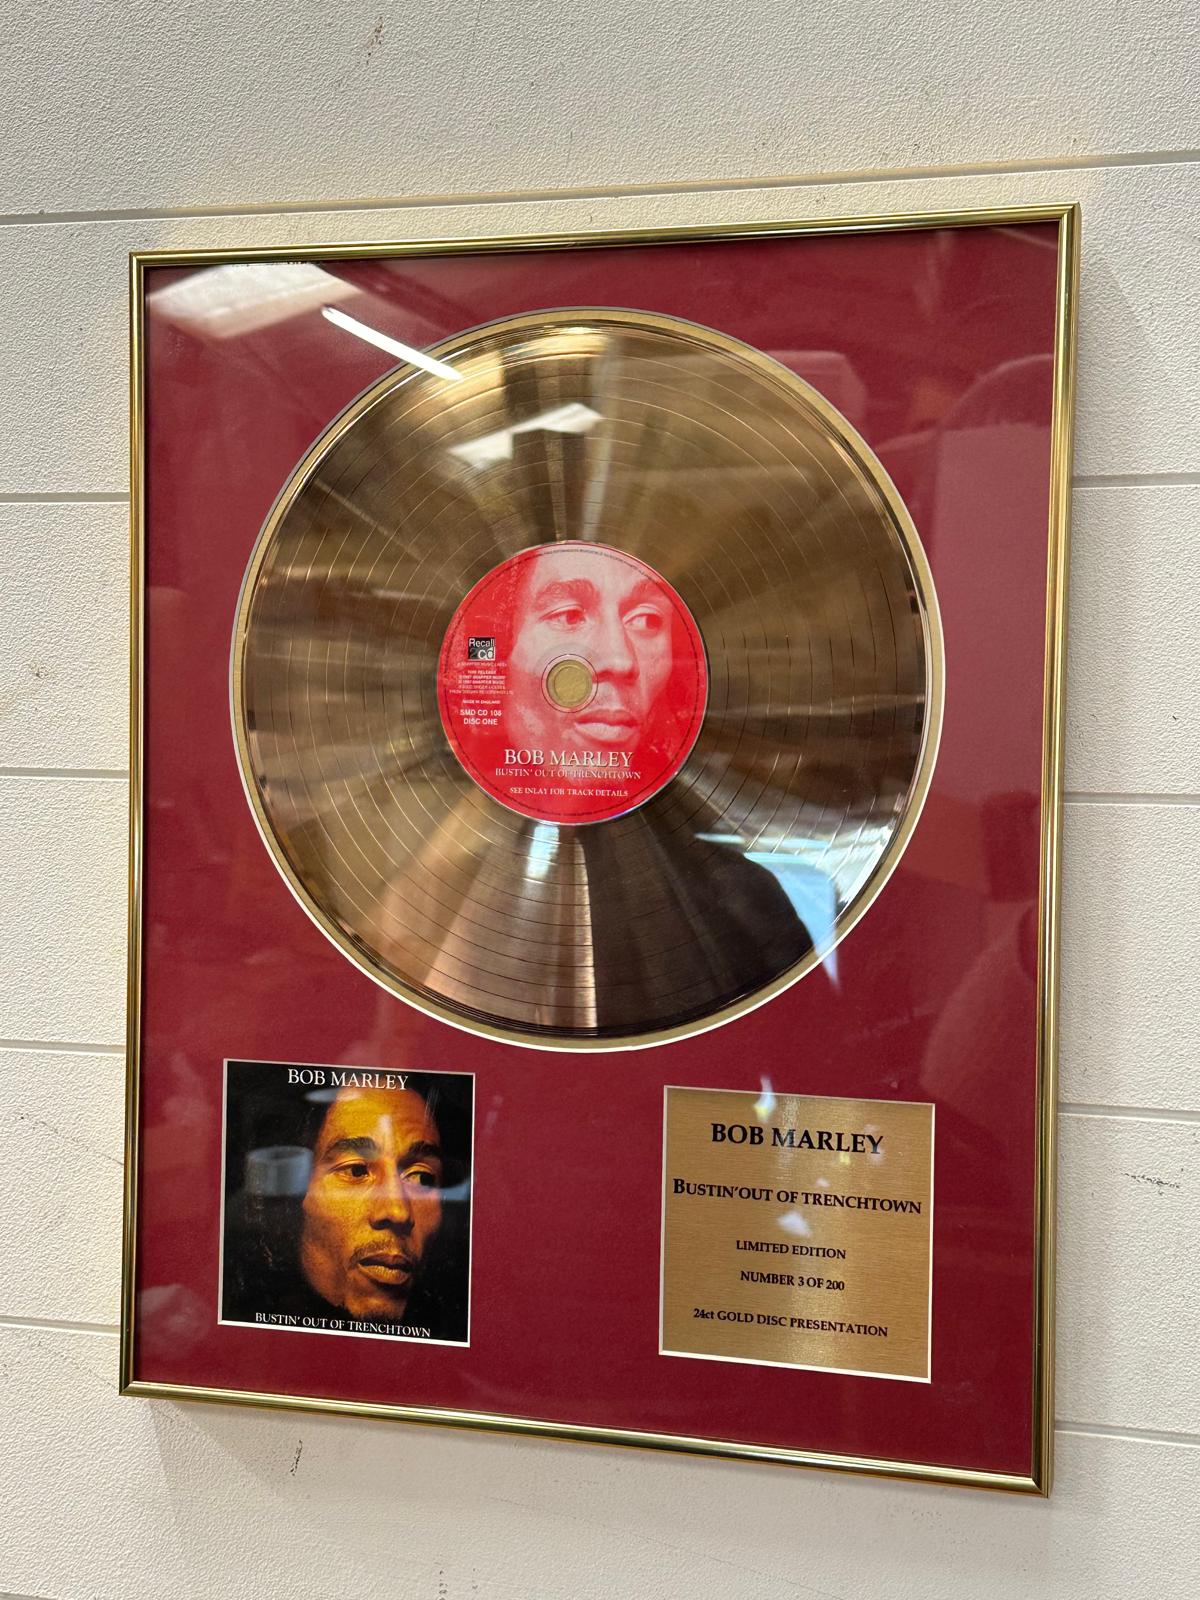 Bob Marley gold disc for the album "Bust In Out Of Trench Town" 3 of 200 (40cm x 50cm)